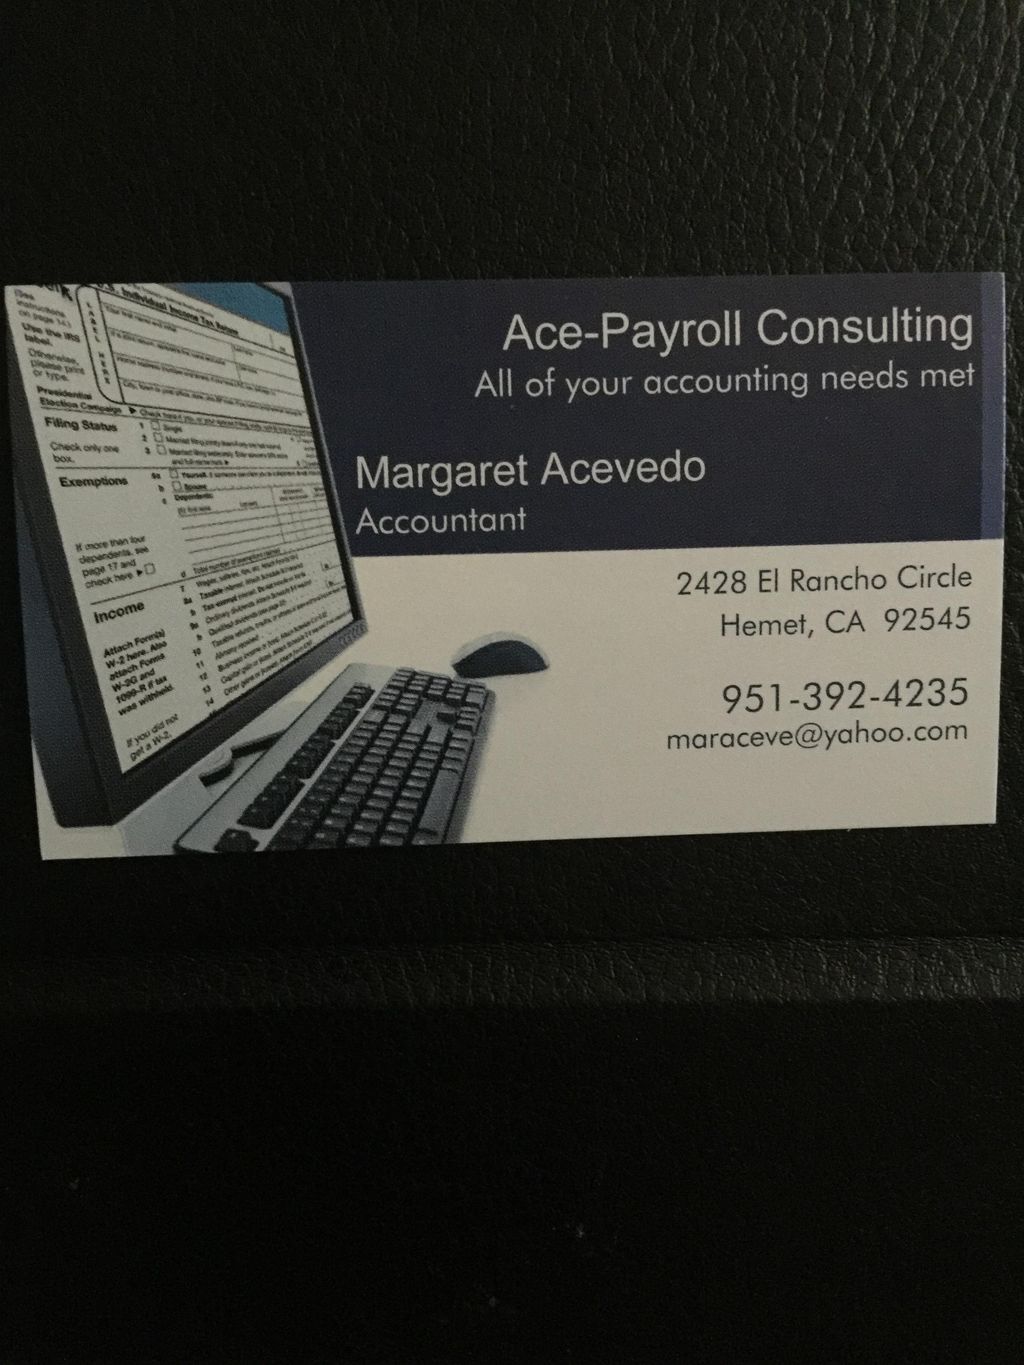 Ace-Payroll & Consulting